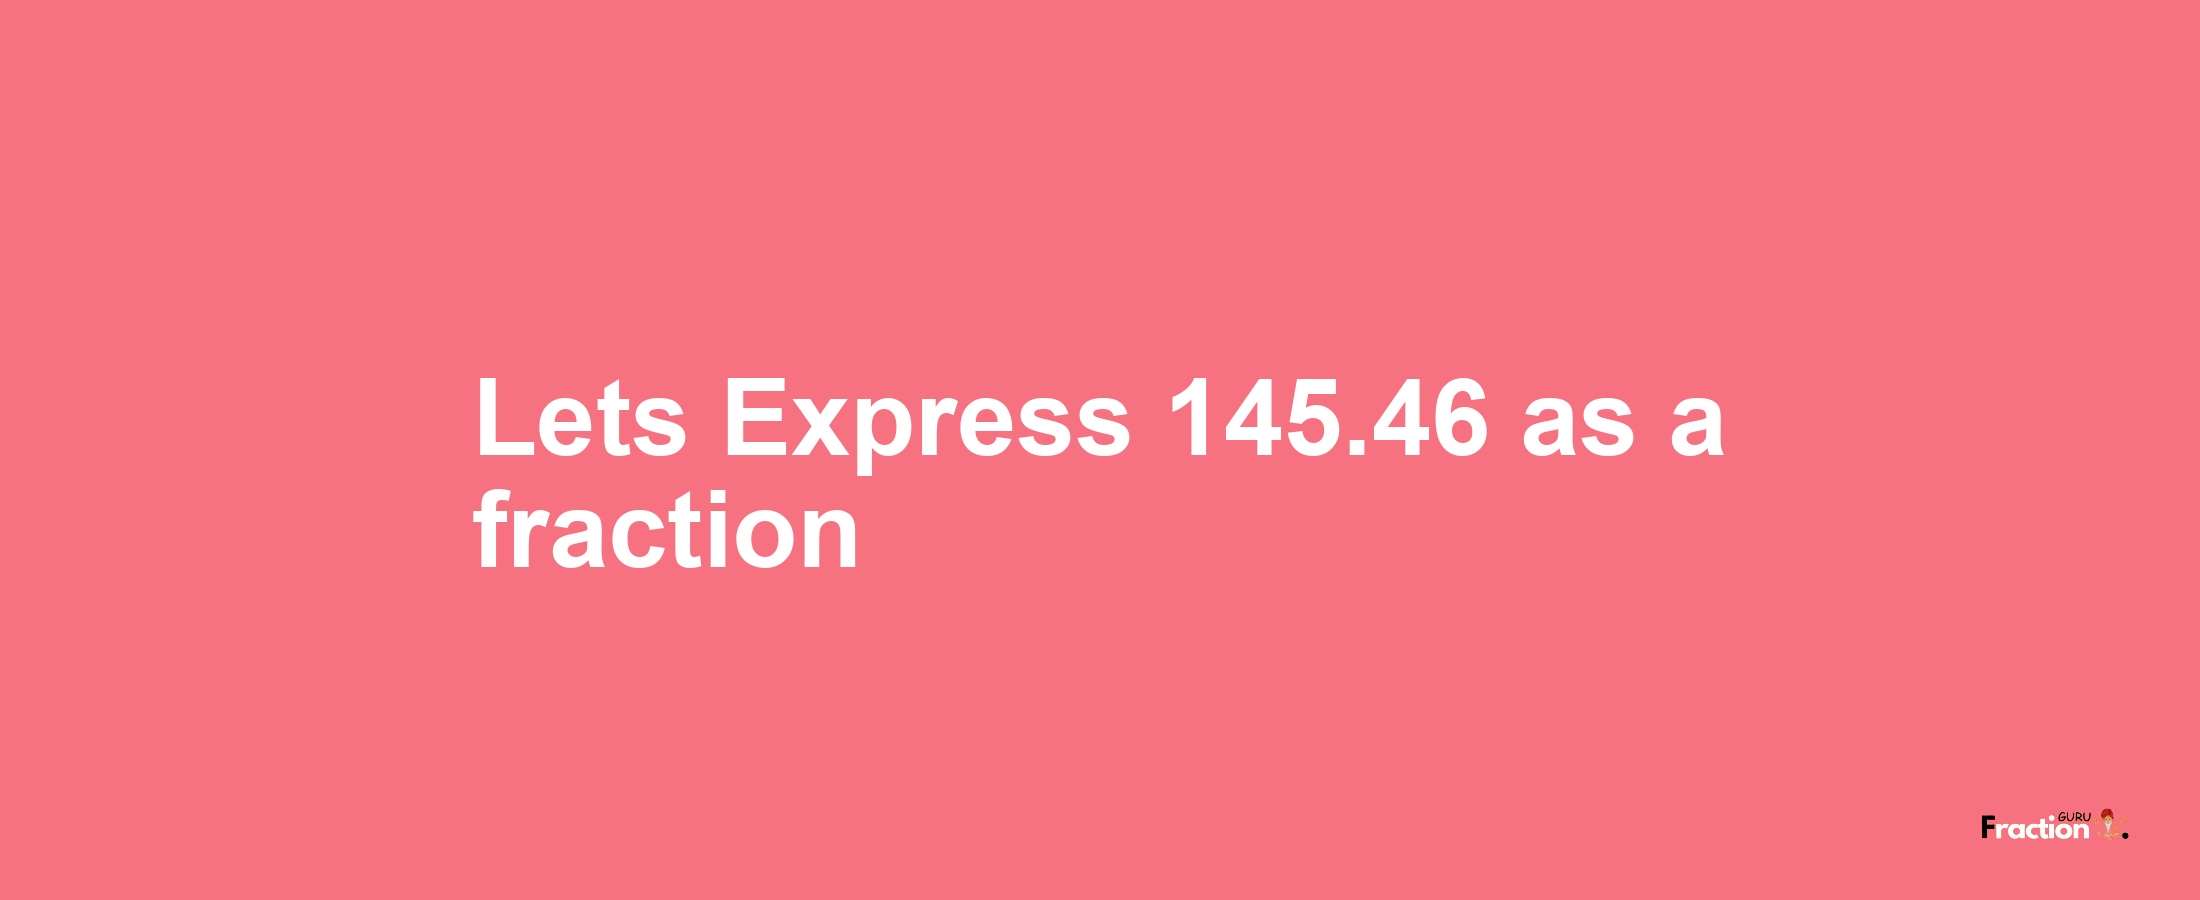 Lets Express 145.46 as afraction